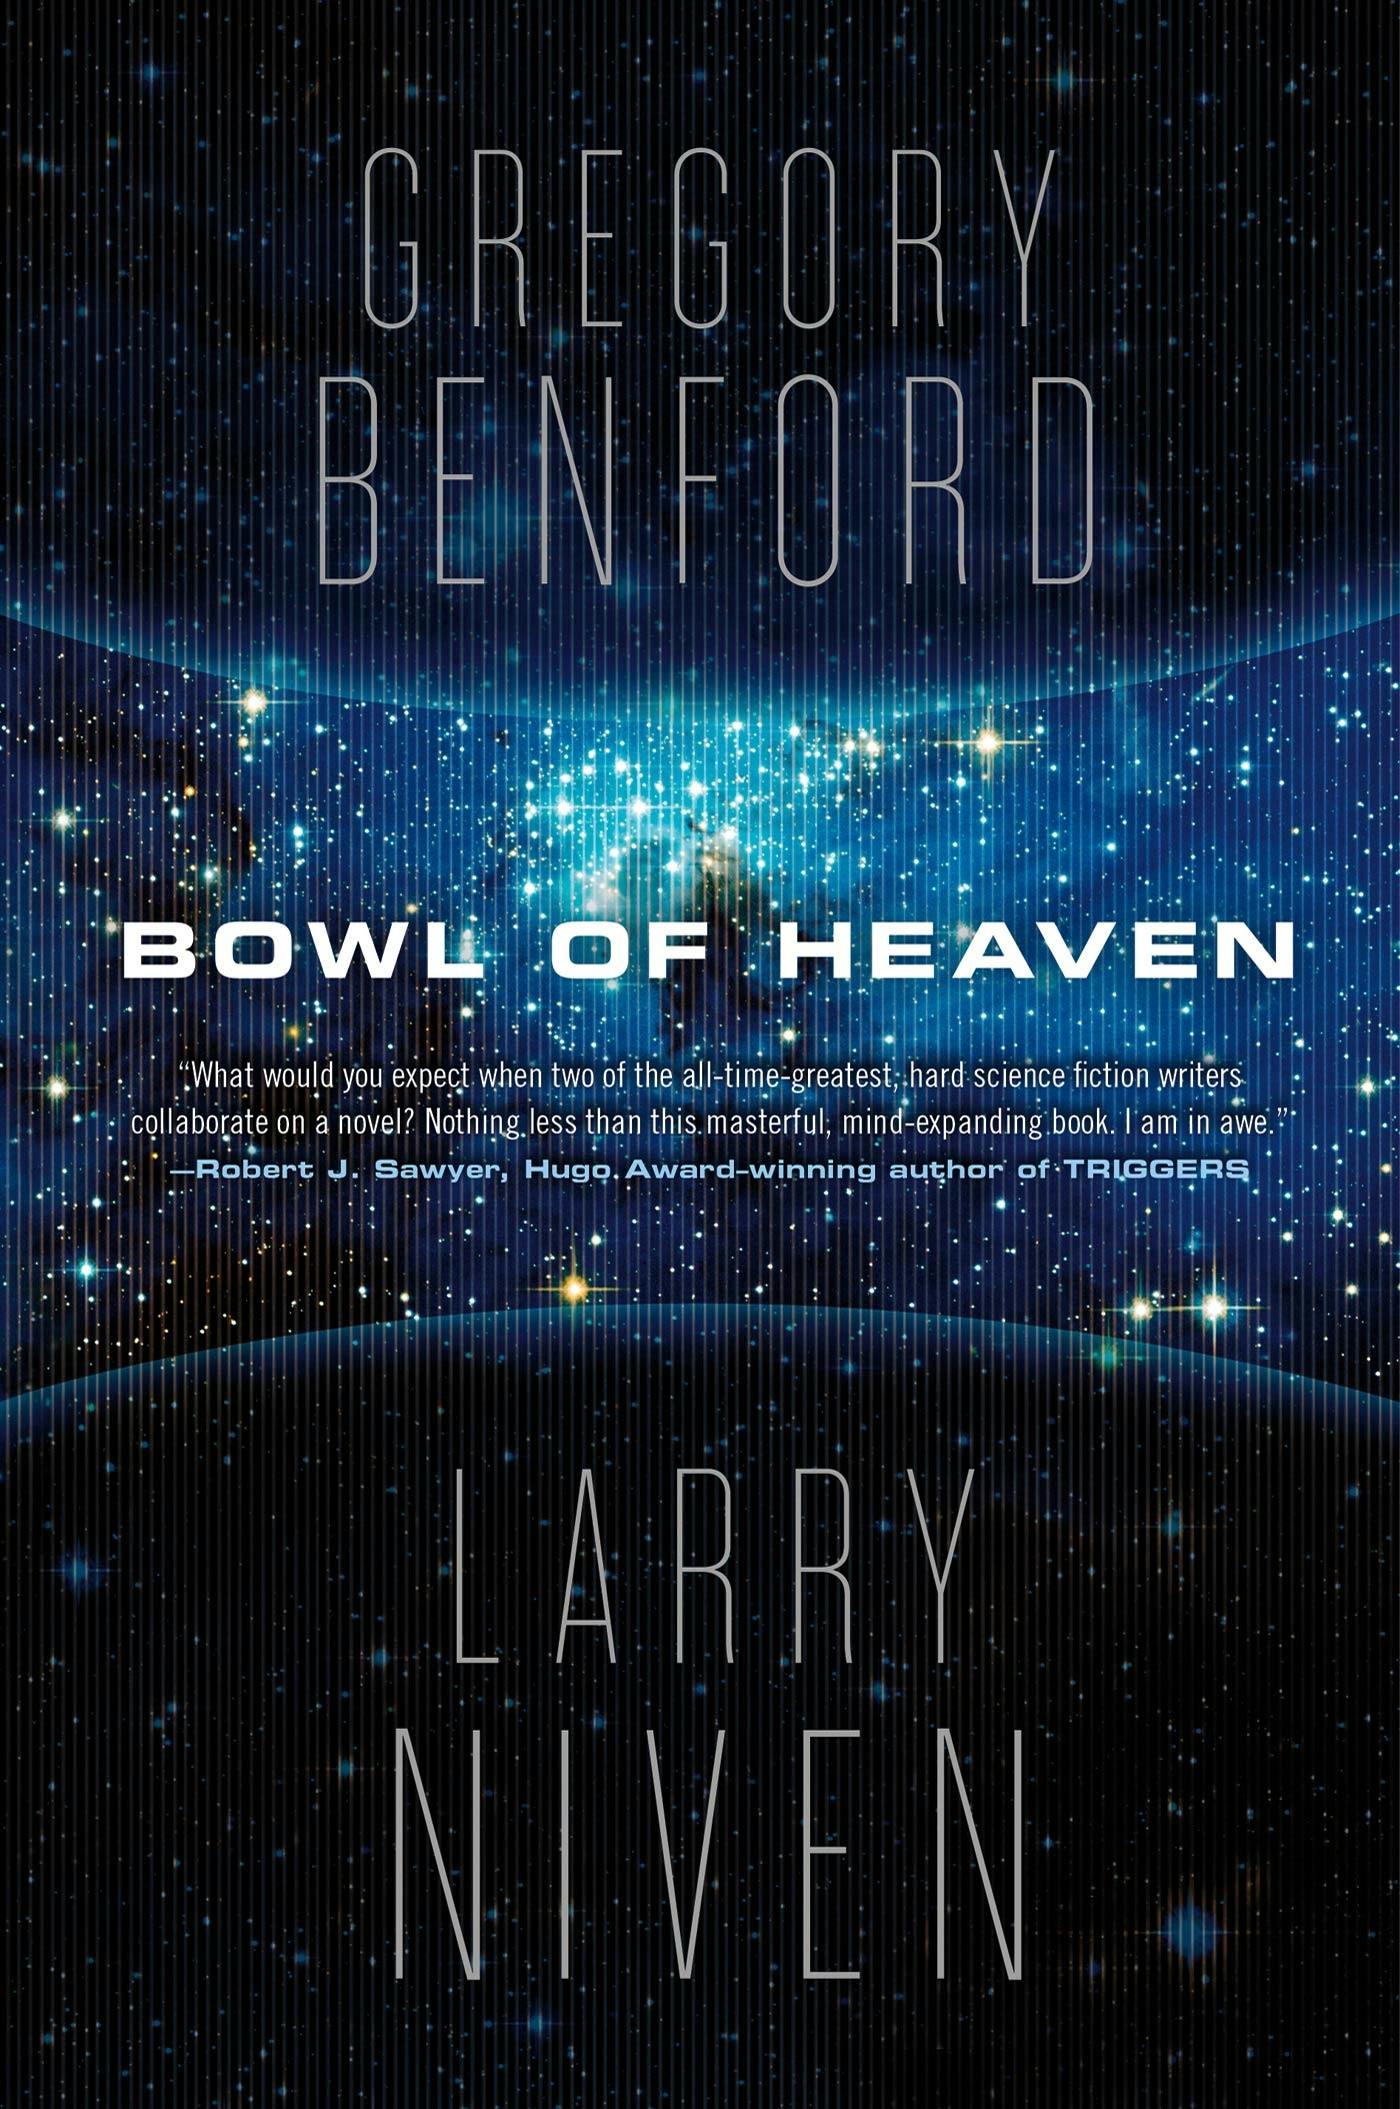 Cover for the book titled as: Bowl of Heaven